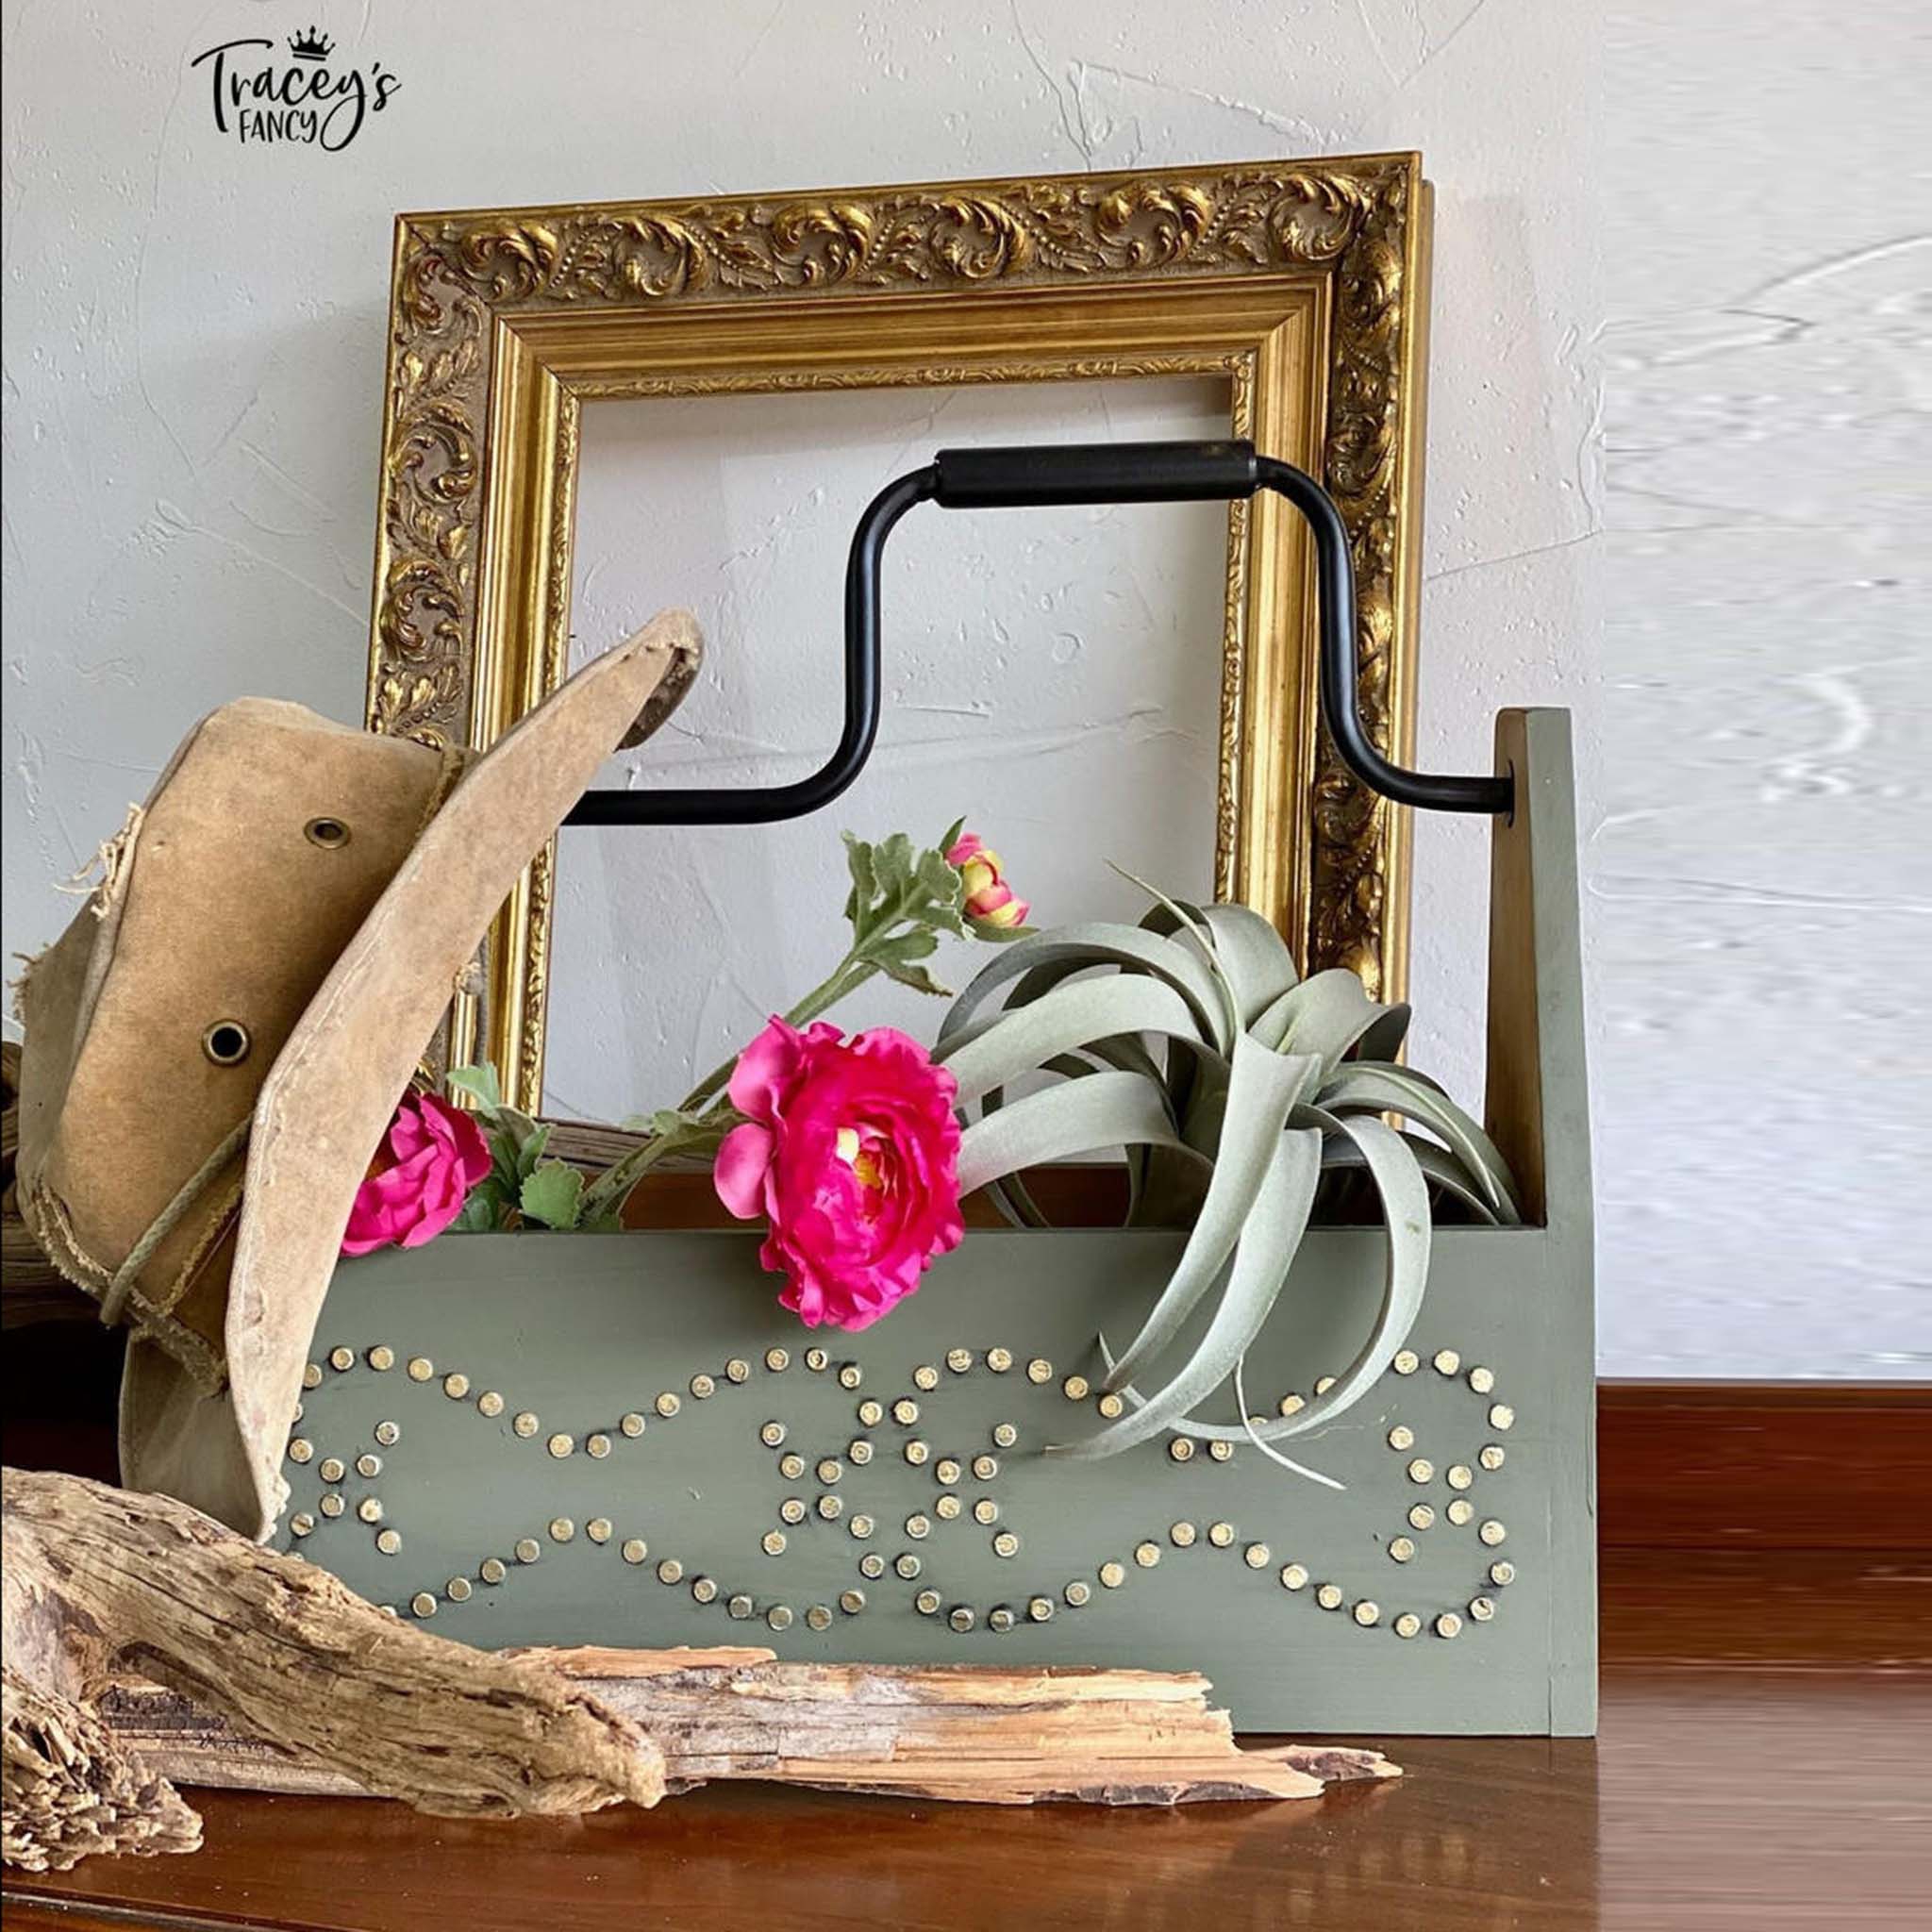 A vintage wood toolbox refurbished by Tracey's Fancy is painted light sage green and features Belles & Whistles Nailhead Trim mylar stencil design as a raised design painted to replicate actual nailheads.